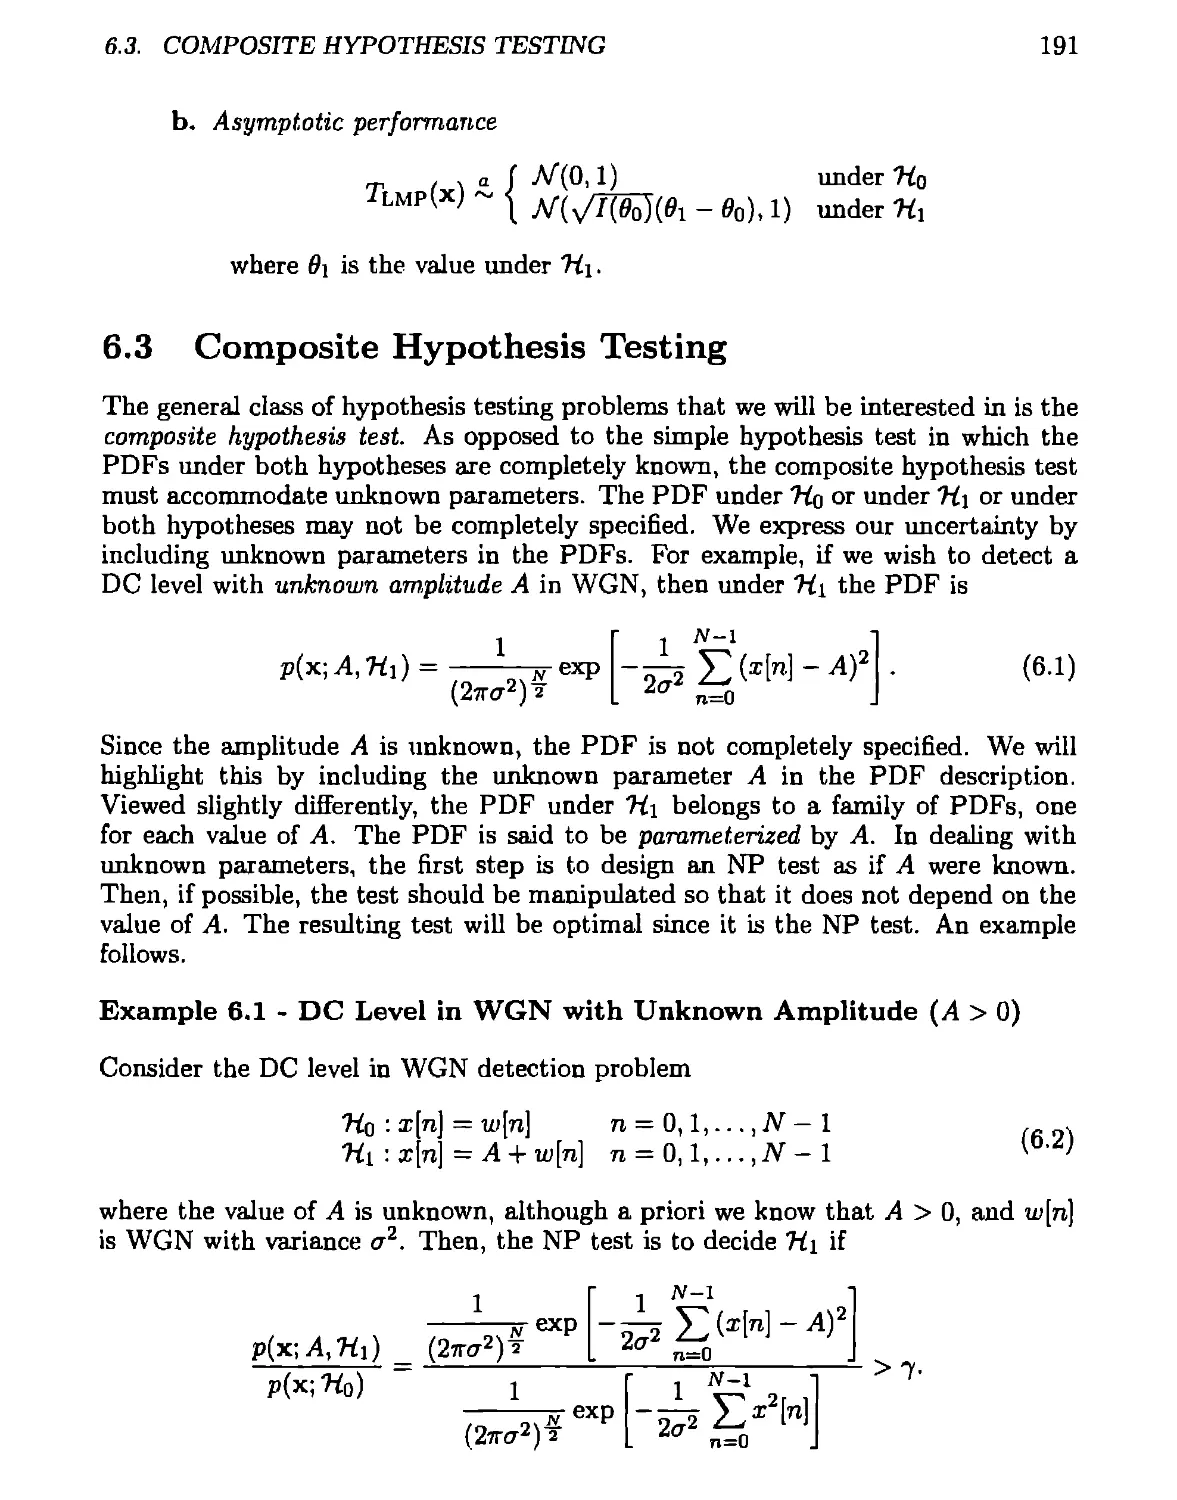 6.3 Composite Hypothesis Testing